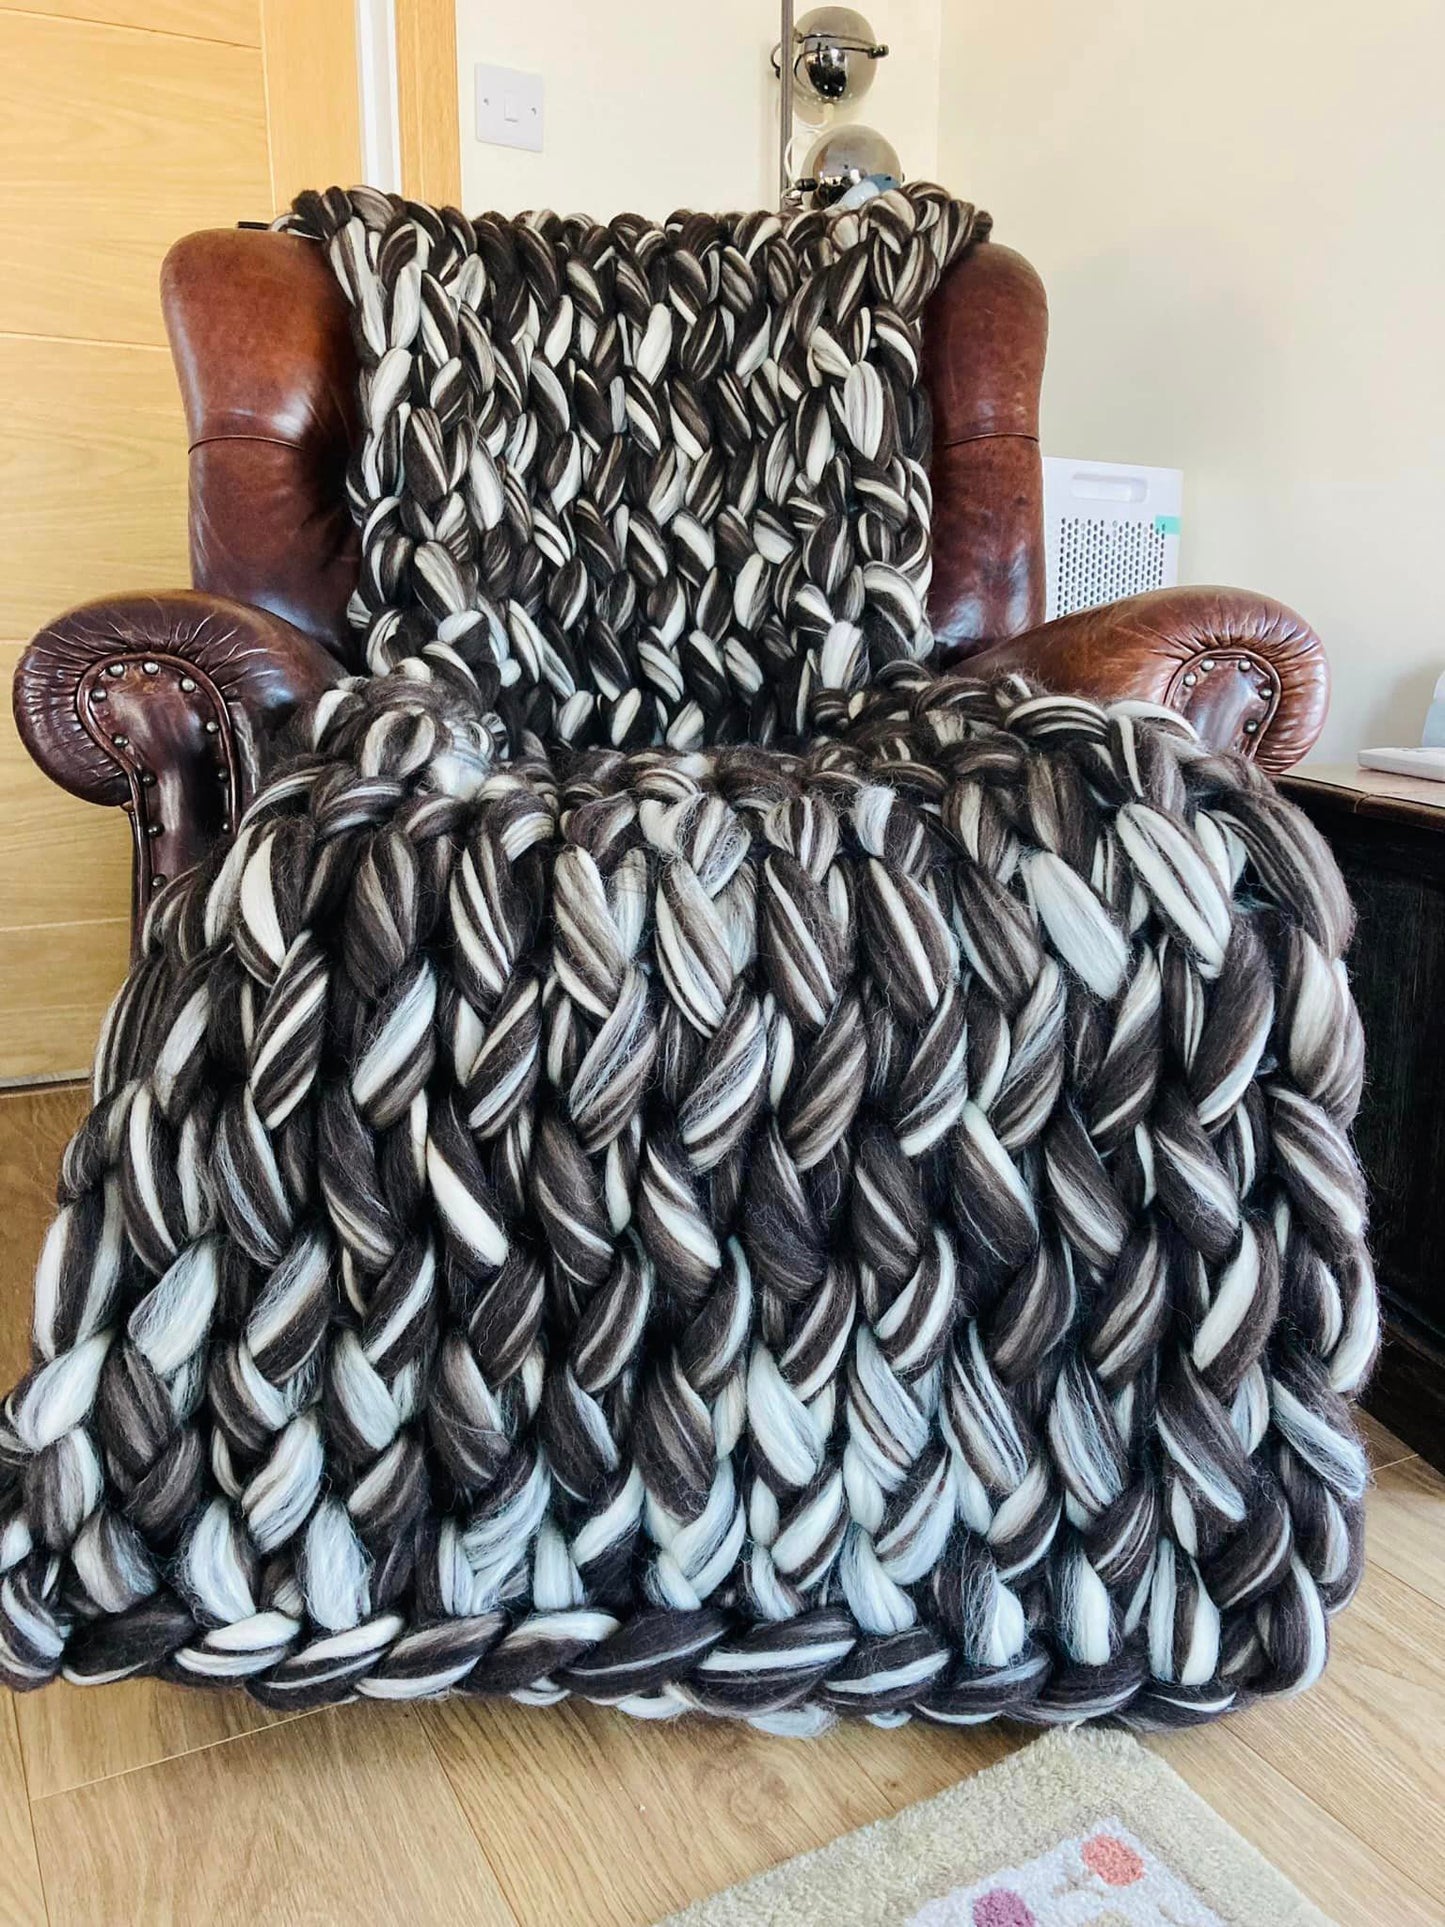 Large Arm Knitted Throw